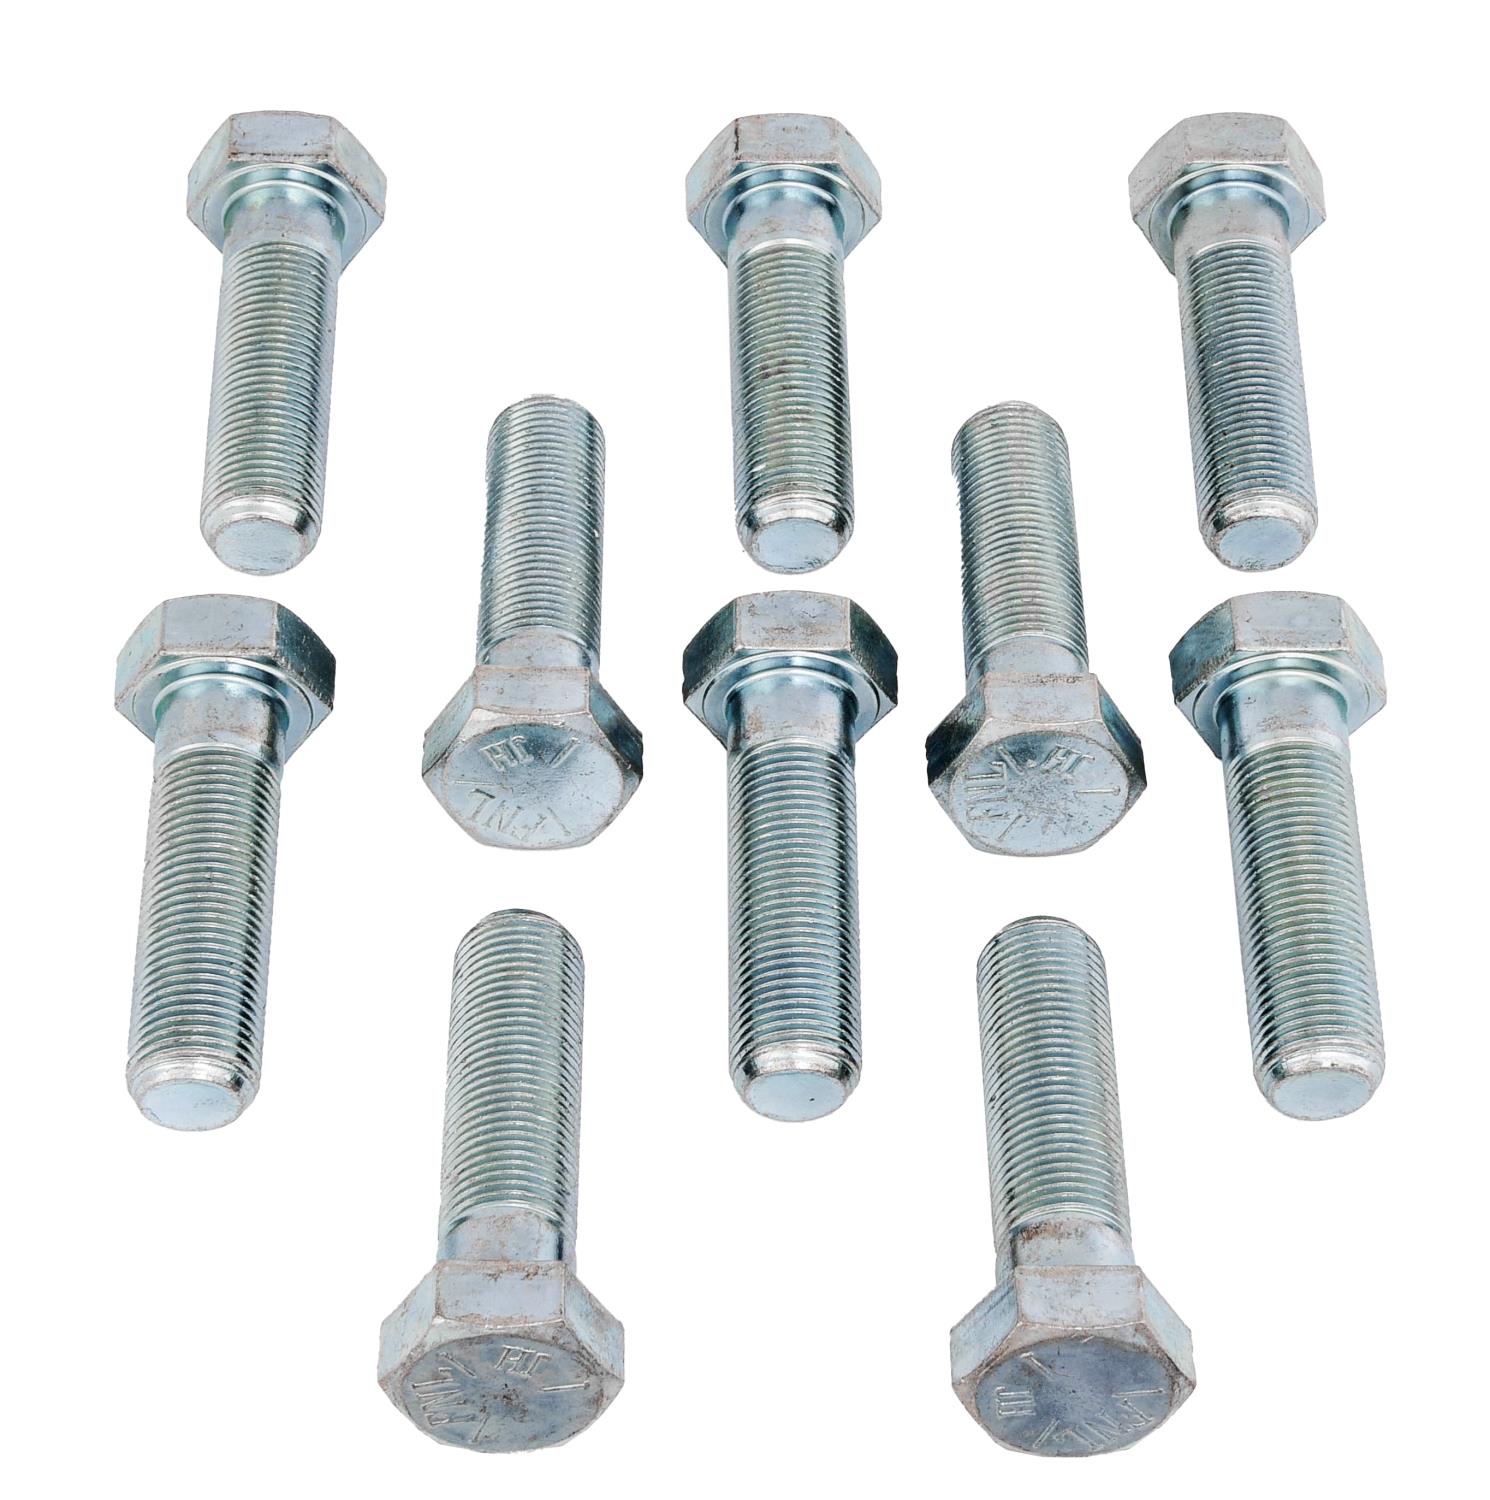 Hex Head Bolts, 5/8 in.-18 x 2 1/4 in. UHL, Carbon Steel, Grade 5 [Set of 10]